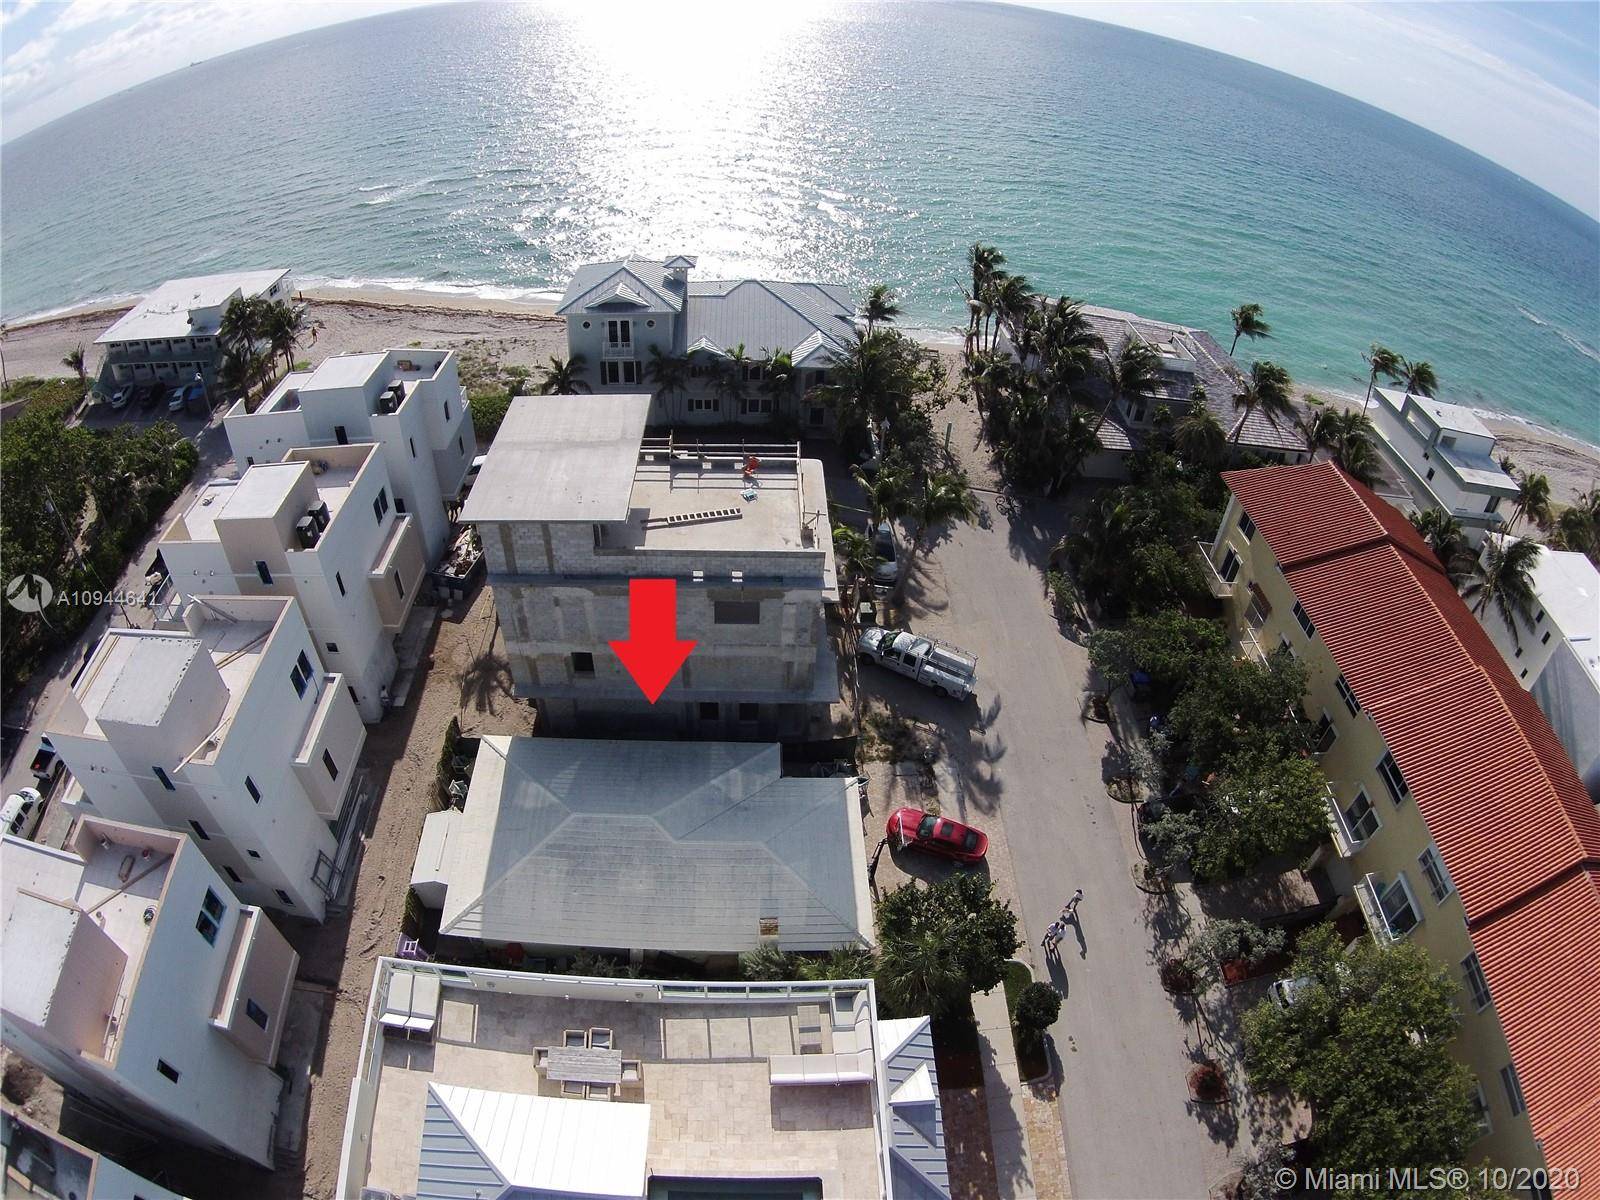 AMAZING LOCATION ! OCEAN VIEWS, seasonal or annual rental, price negotiable, 2nd lot from ocean, 2BR, 2BA, 1400 sq ft, single story, charming FL beach house, modern renovation, furnished, all ...